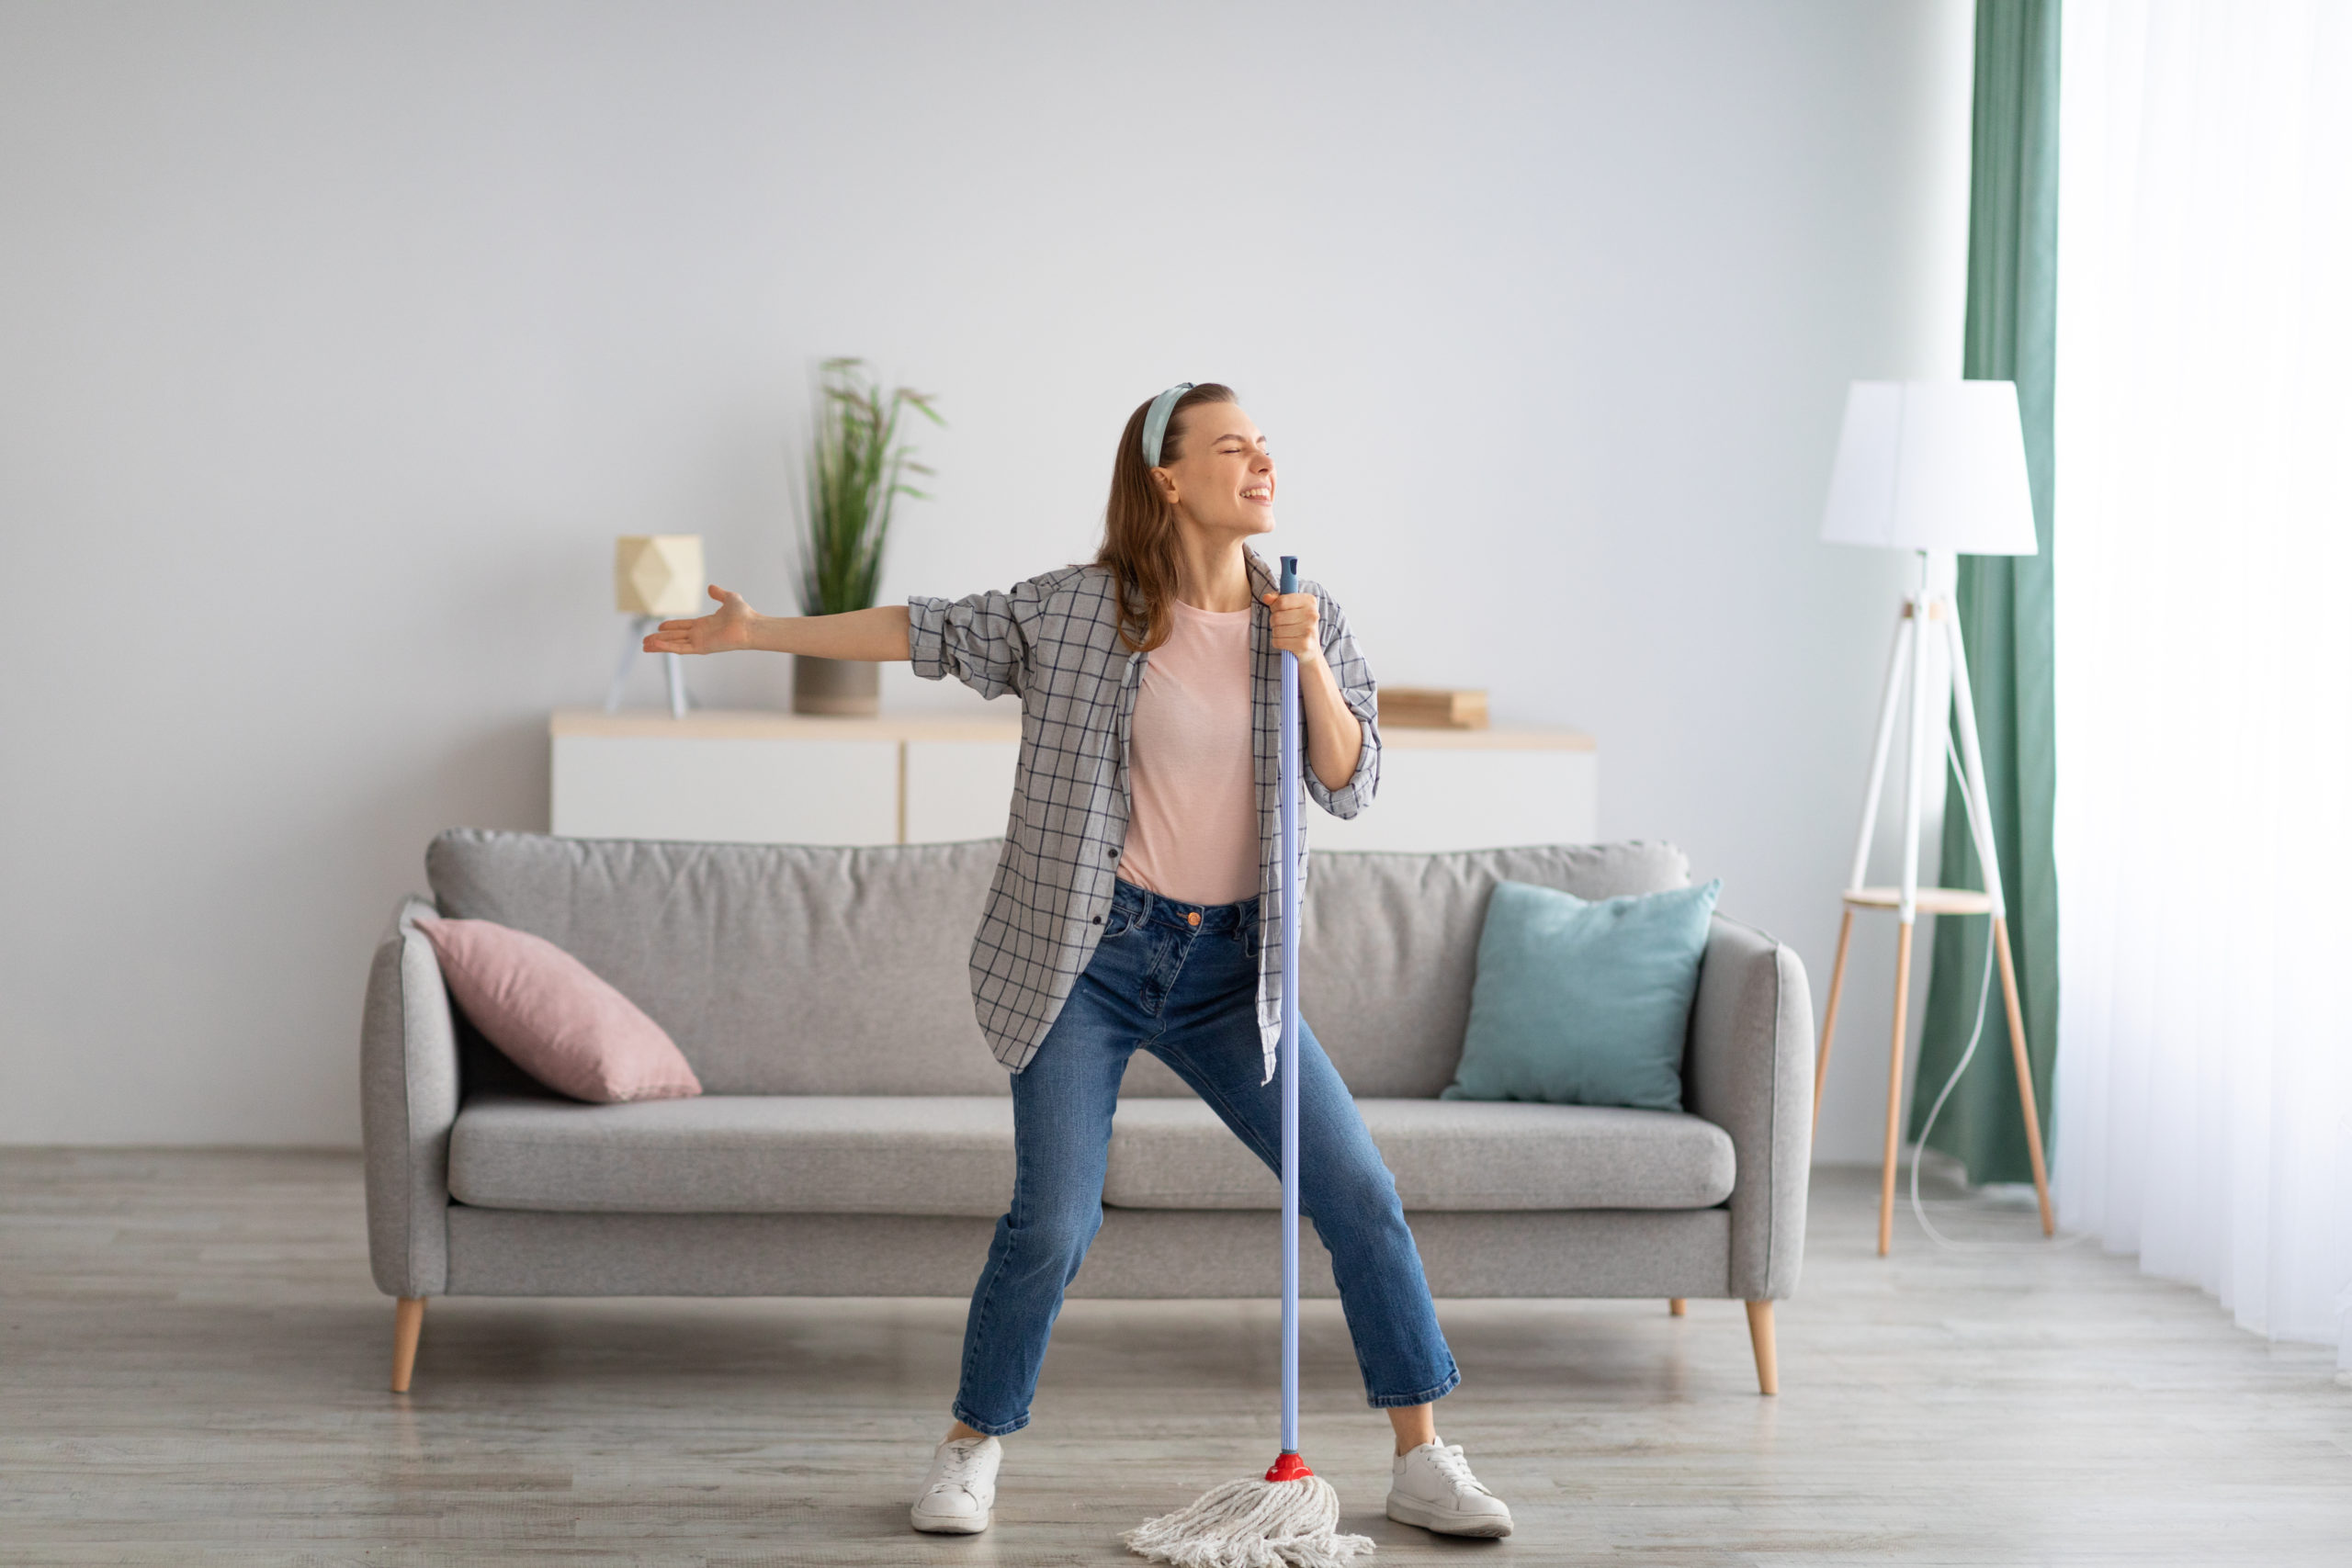 Woman using broom as microphone while cleaning her living room.